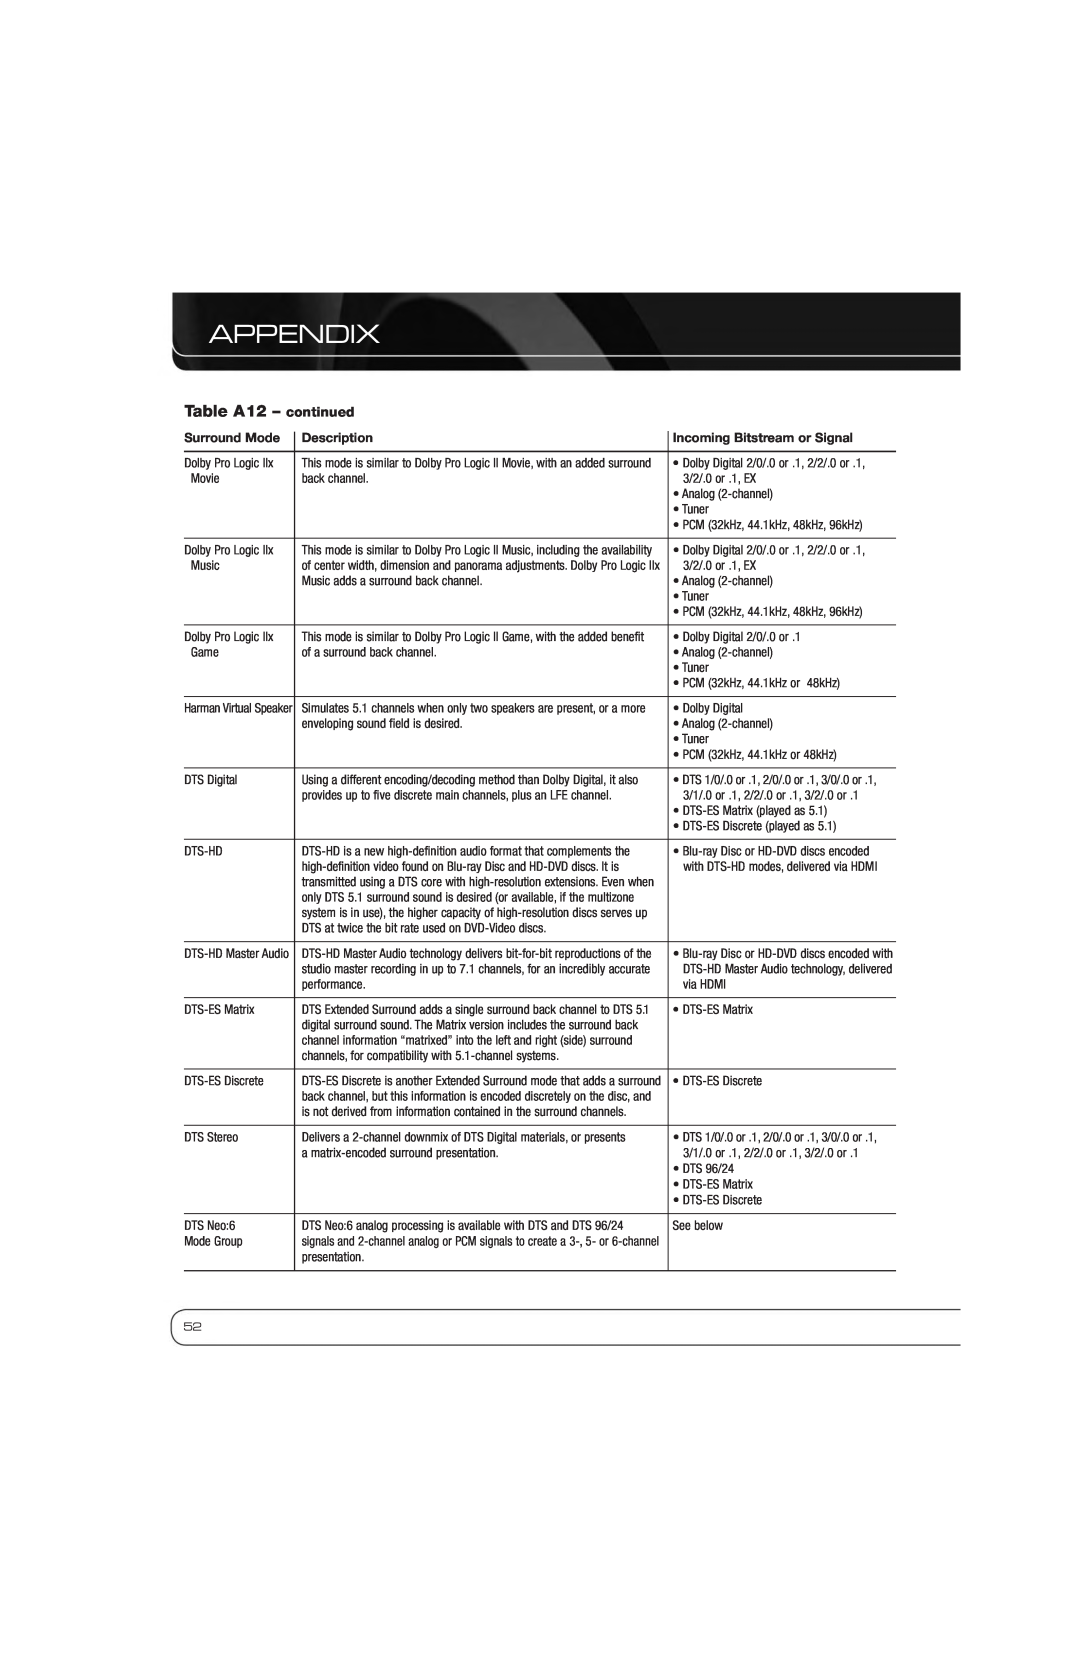 Harman AVR 2600 owner manual Table A12 - continued, Appendix 